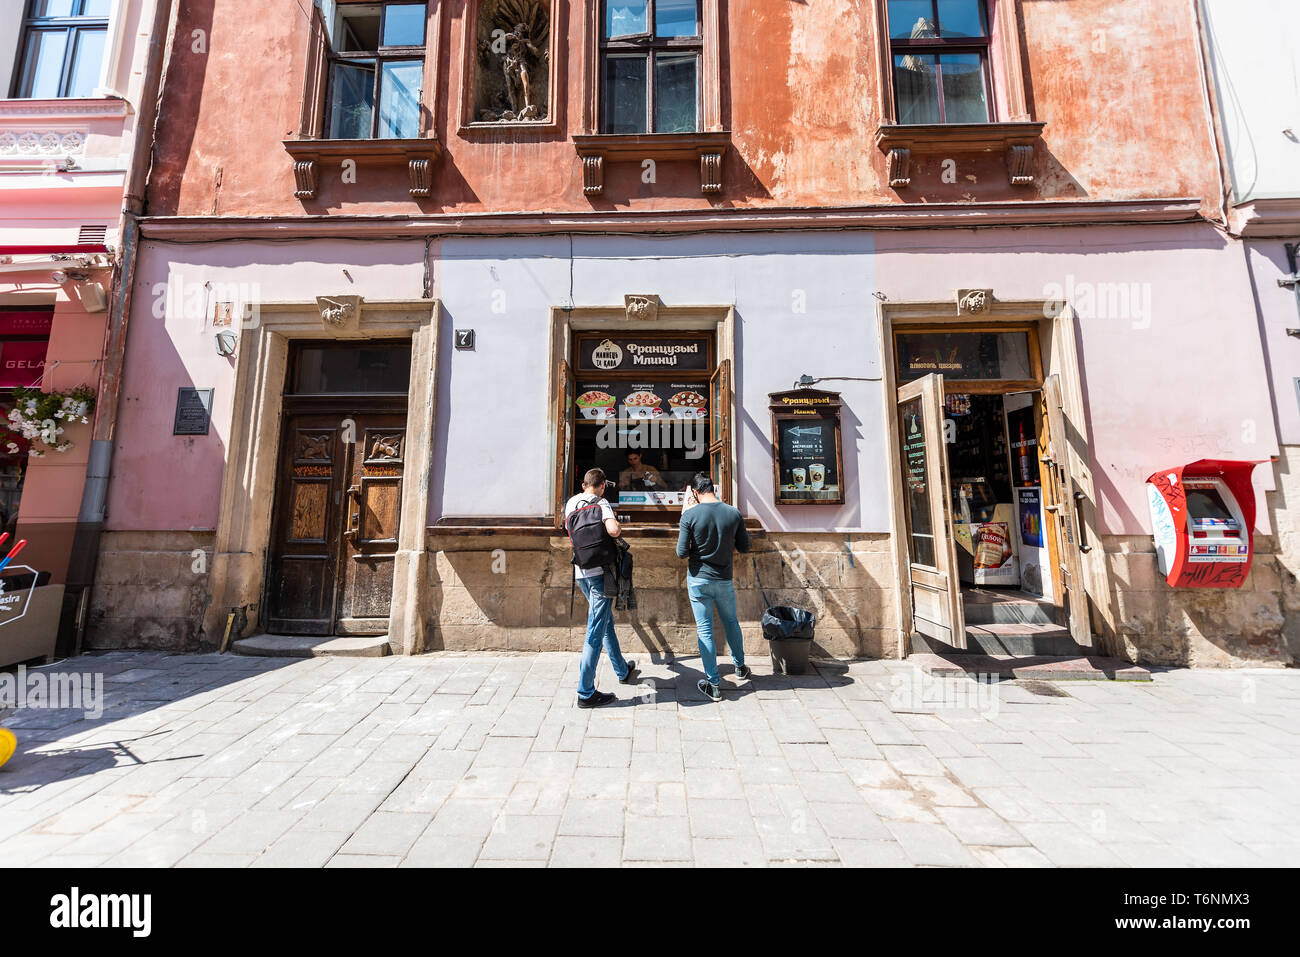 Lviv, Ukraine - August 1, 2018: Street in historic Ukrainian Polish Lvov city during day with people at counter of french crepe restaurant ordering fo Stock Photo